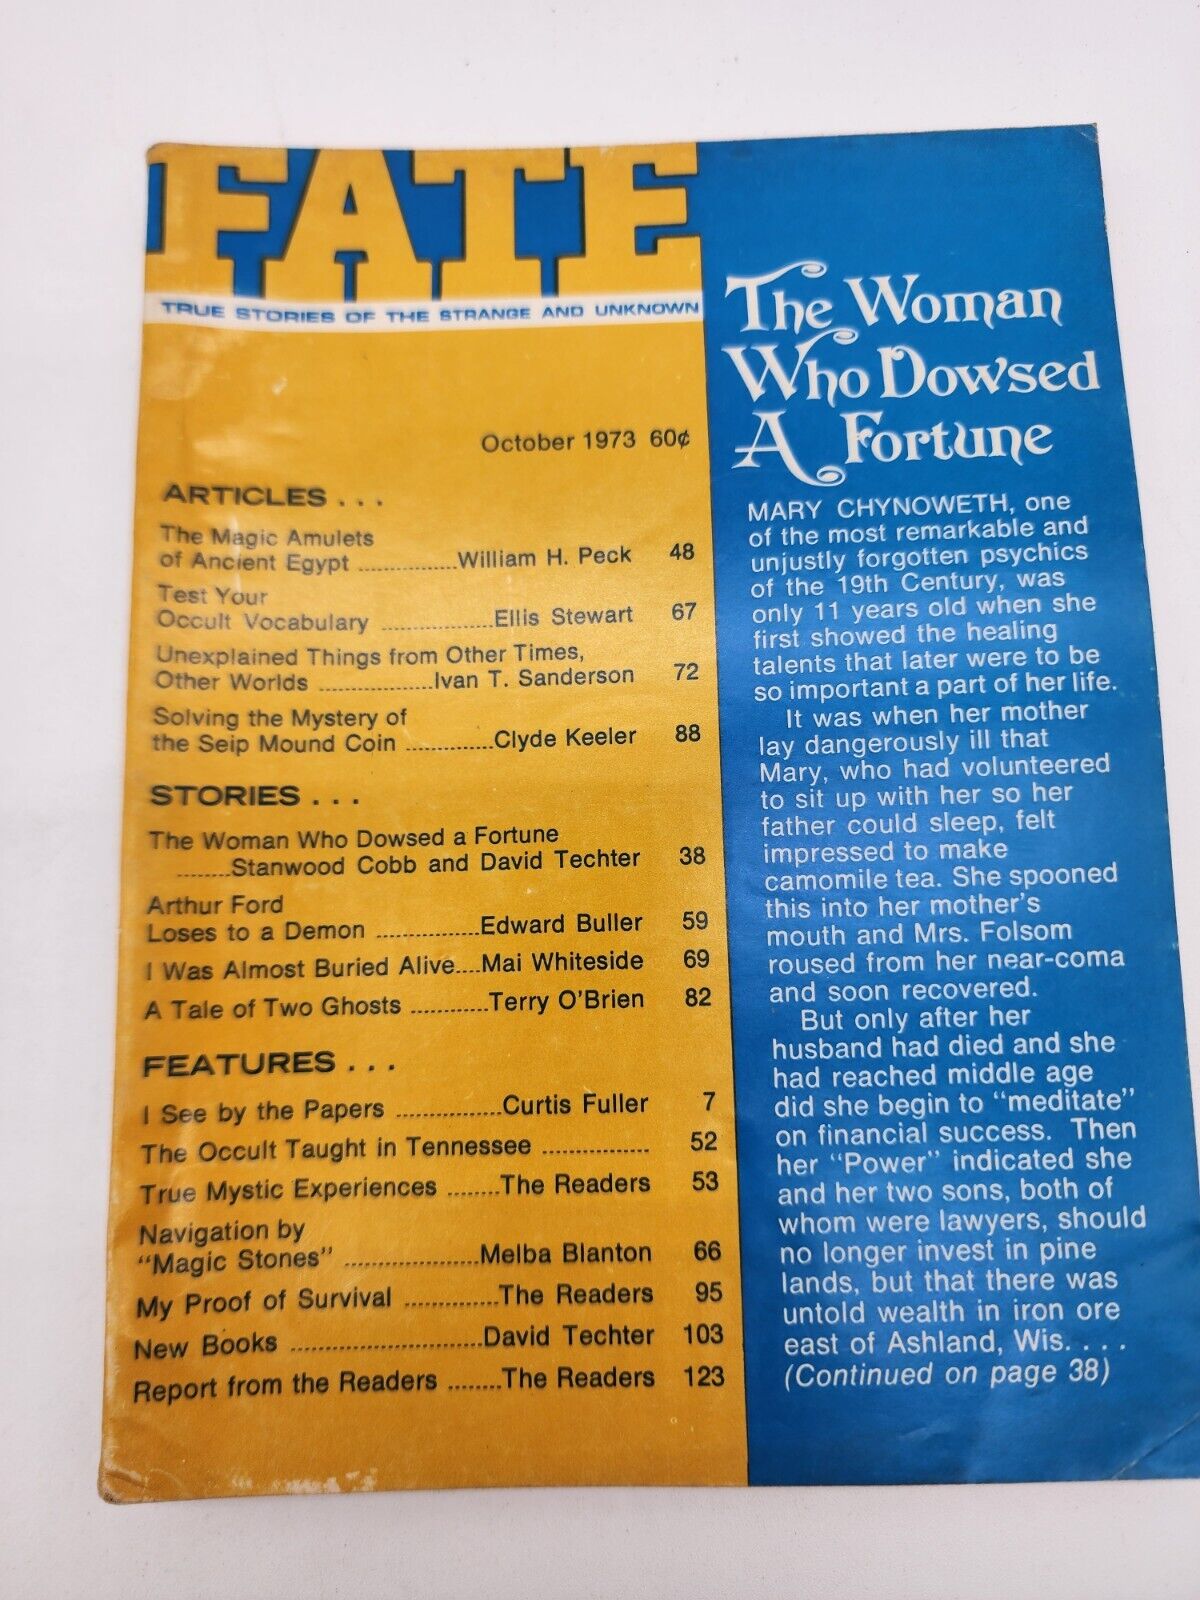 Fate Digest/Magazine Vol. 26 #10 Issue 283 October 1973